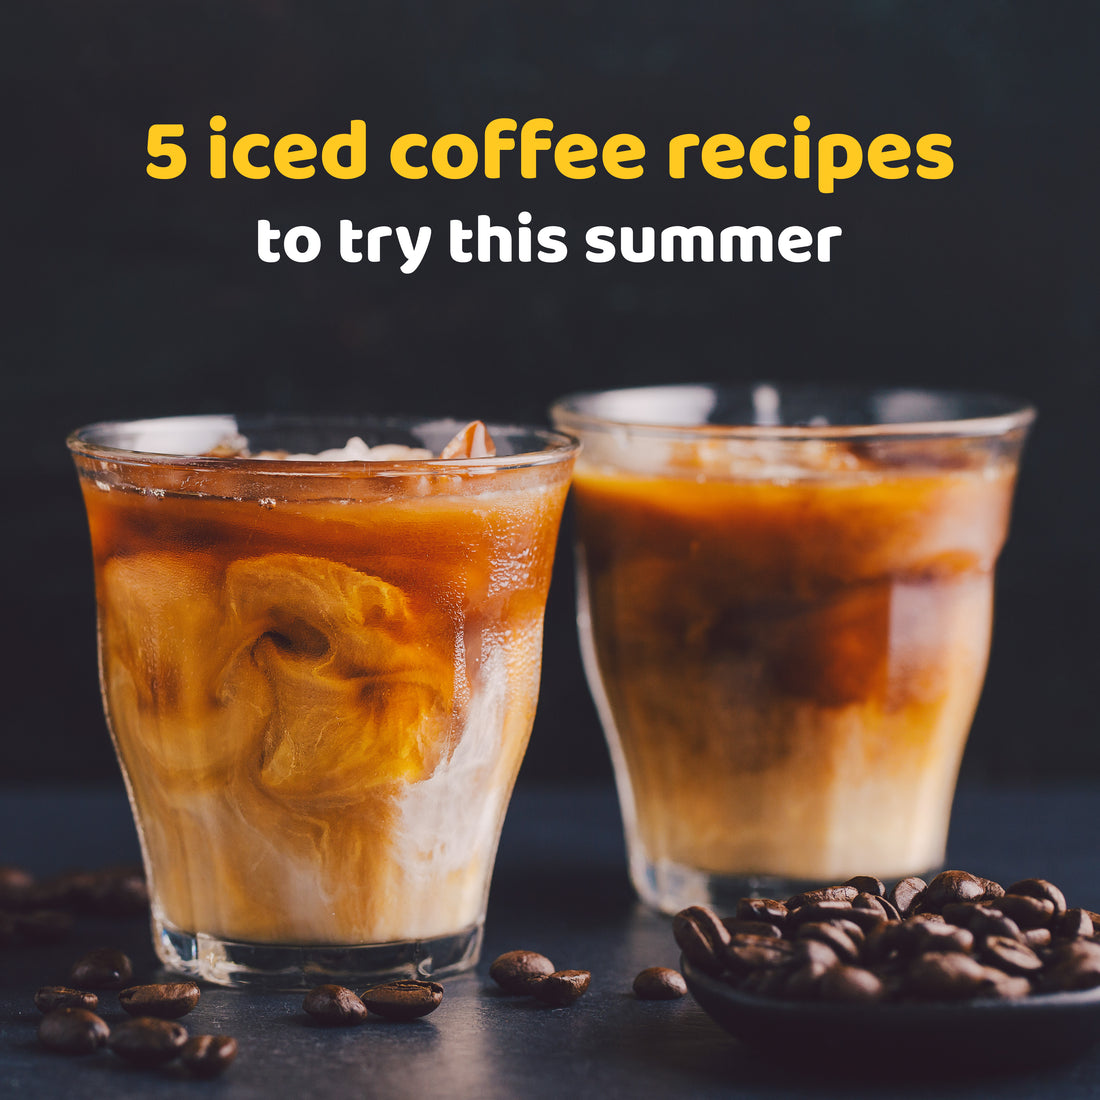 5 Iced Coffee Recipes to try this summer!